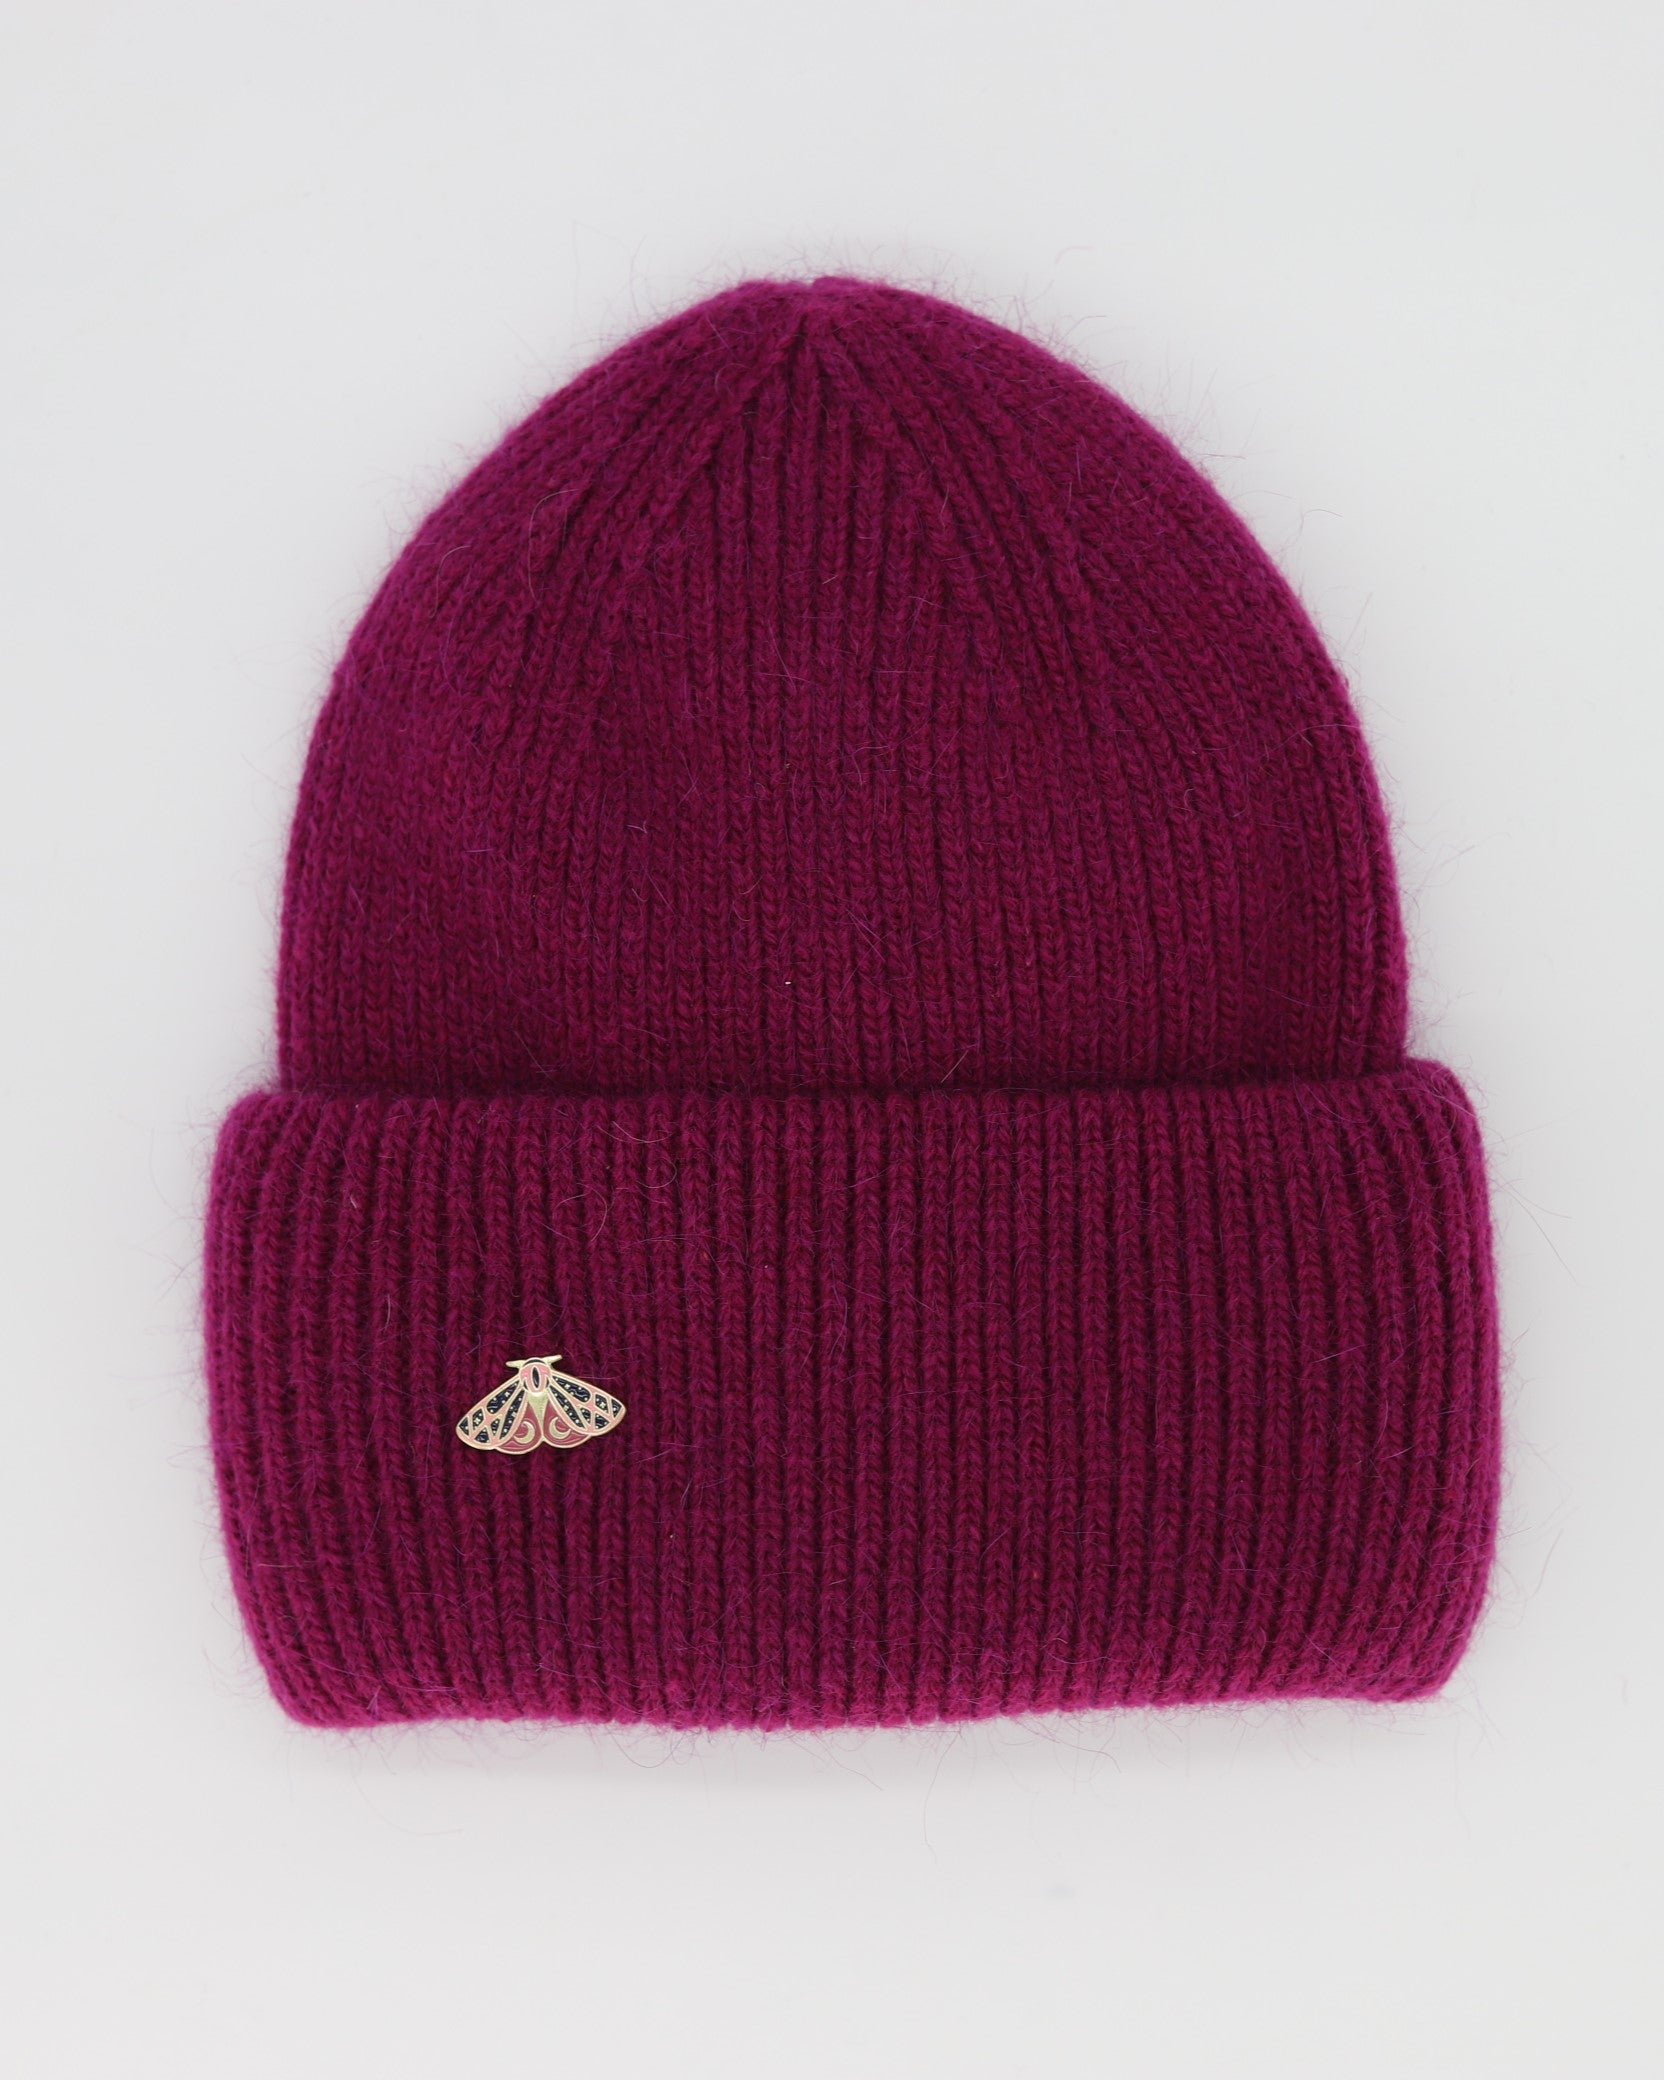 This Hat is a finest hat with a classic silhouette. A luxurious accessory for women made from the softest natural angora and sheep wool for extreme comfort and warmth. It is made in a trendy fuchsia color accompanied by an elegant pin. This product is sourced and manufactured in Poland.